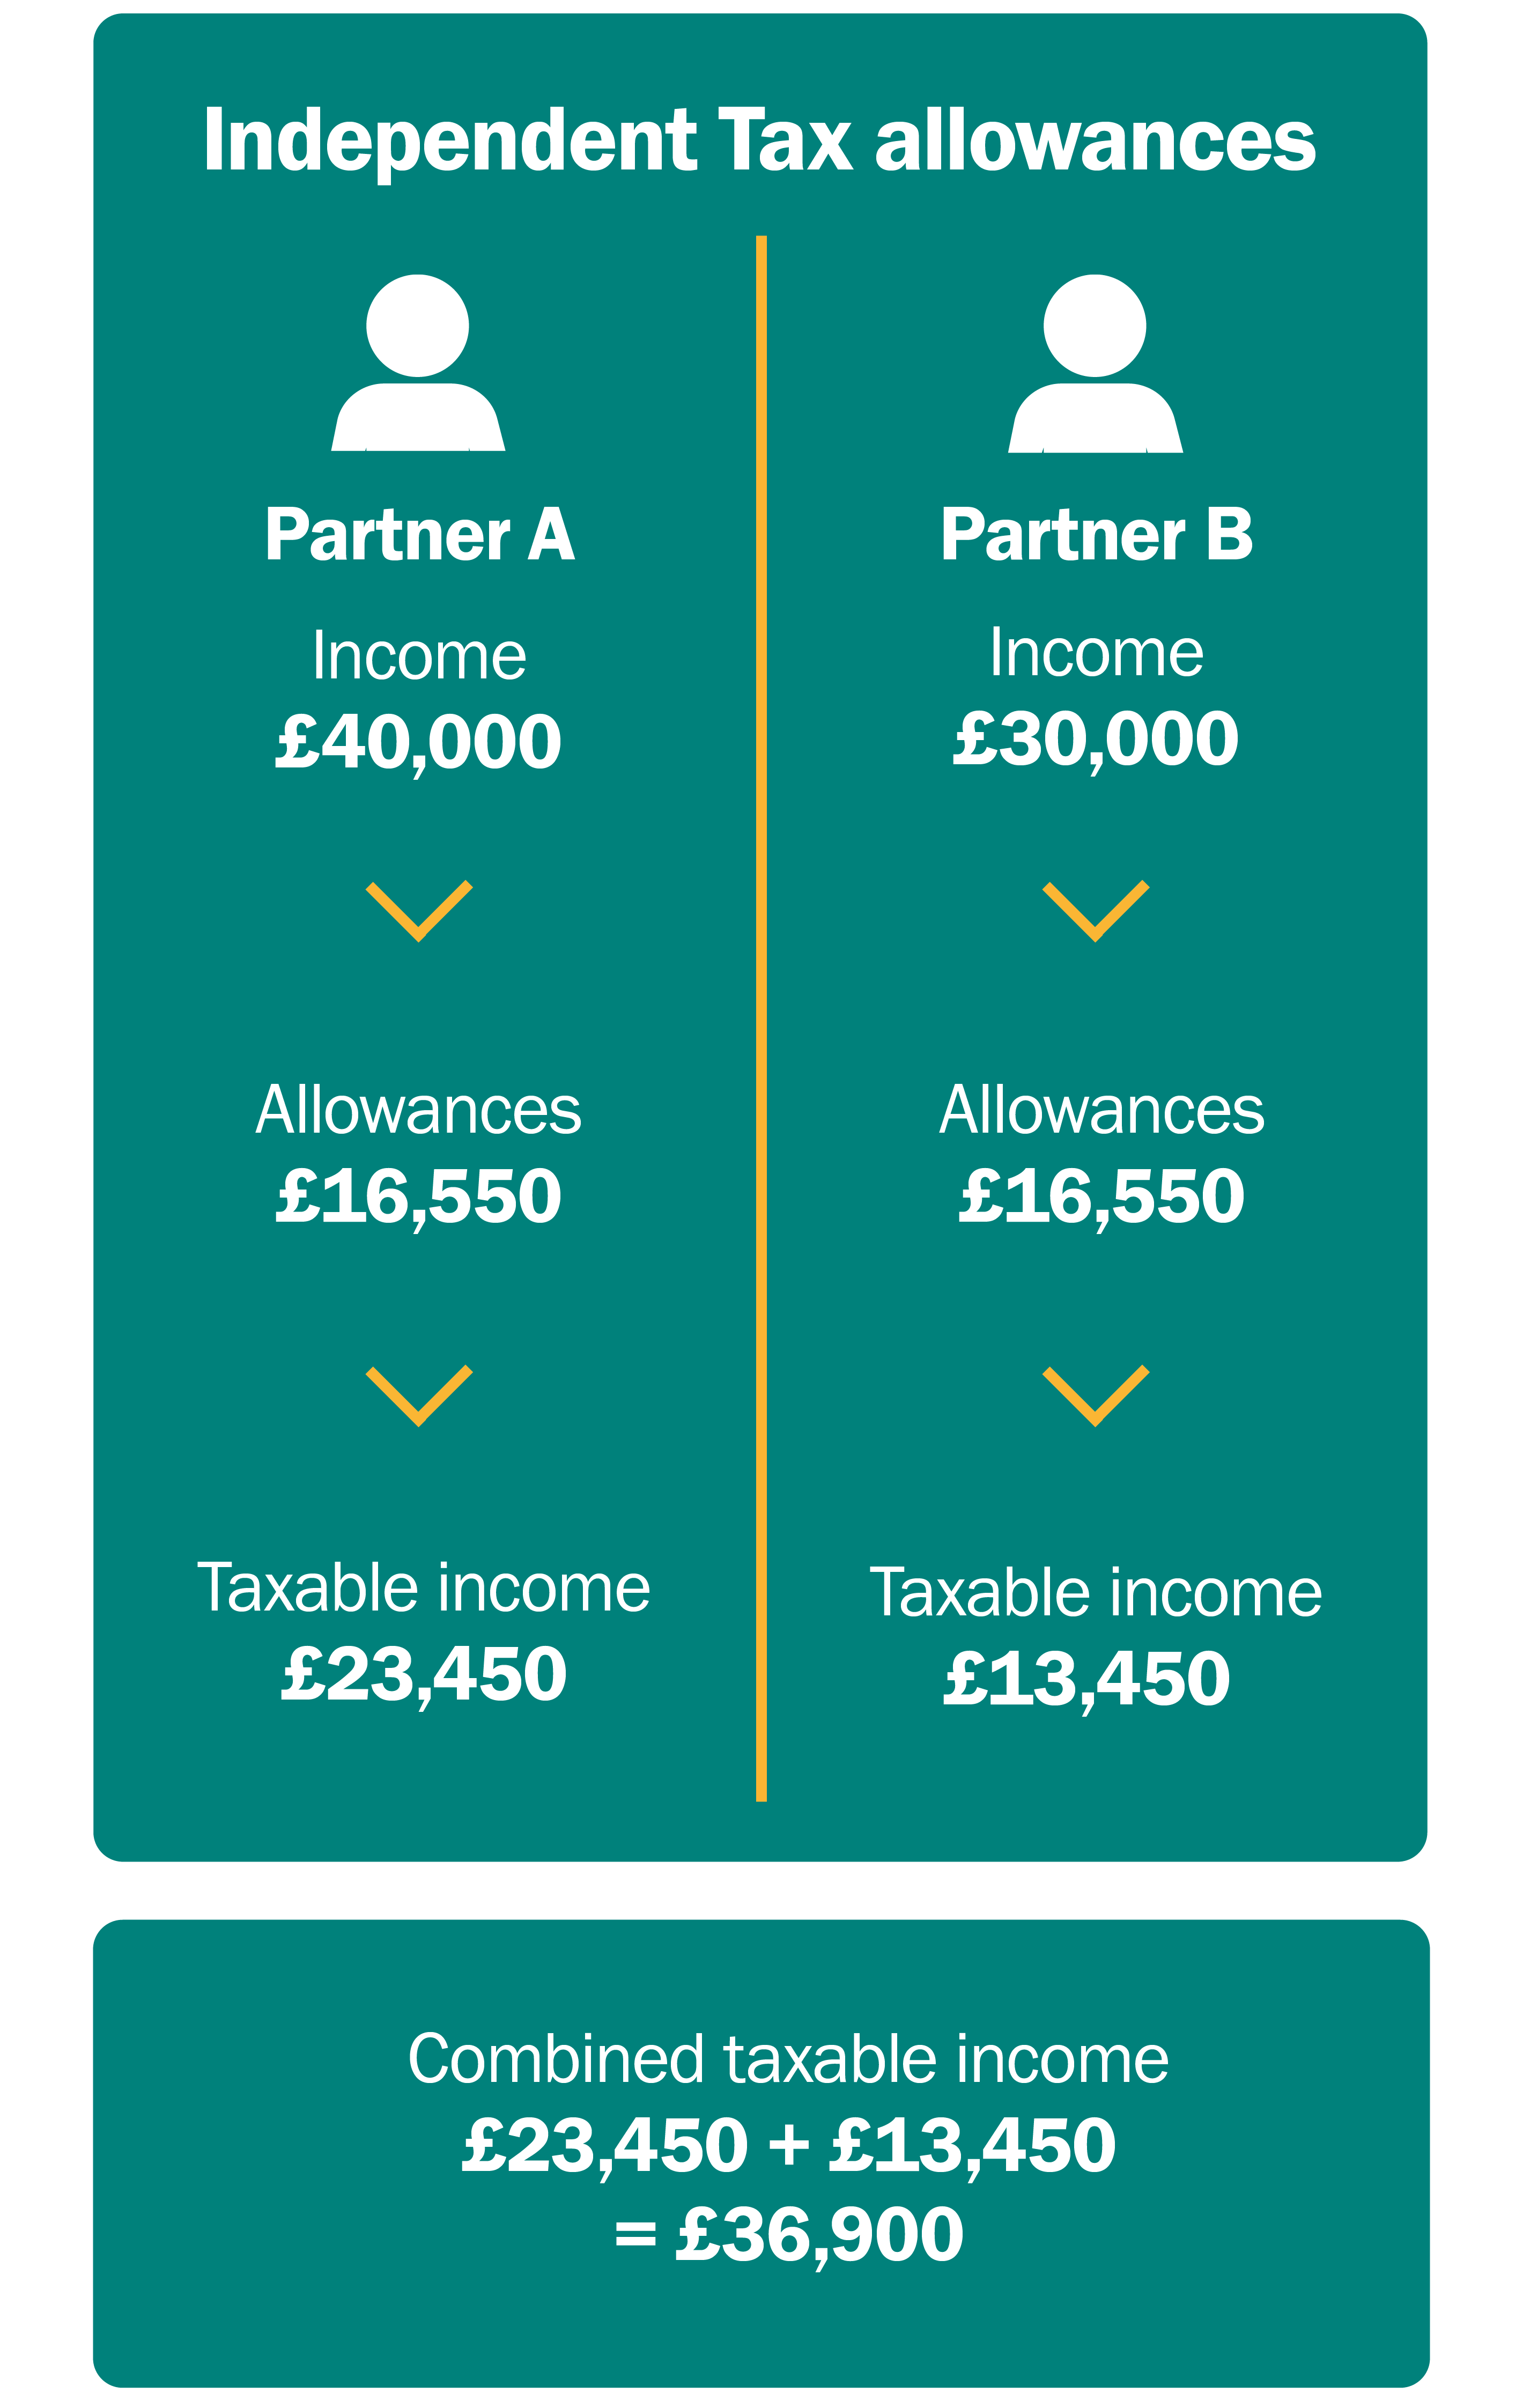 An illustration showing the basic allowances a married couple or civil partner's will receive when they are independently taxed